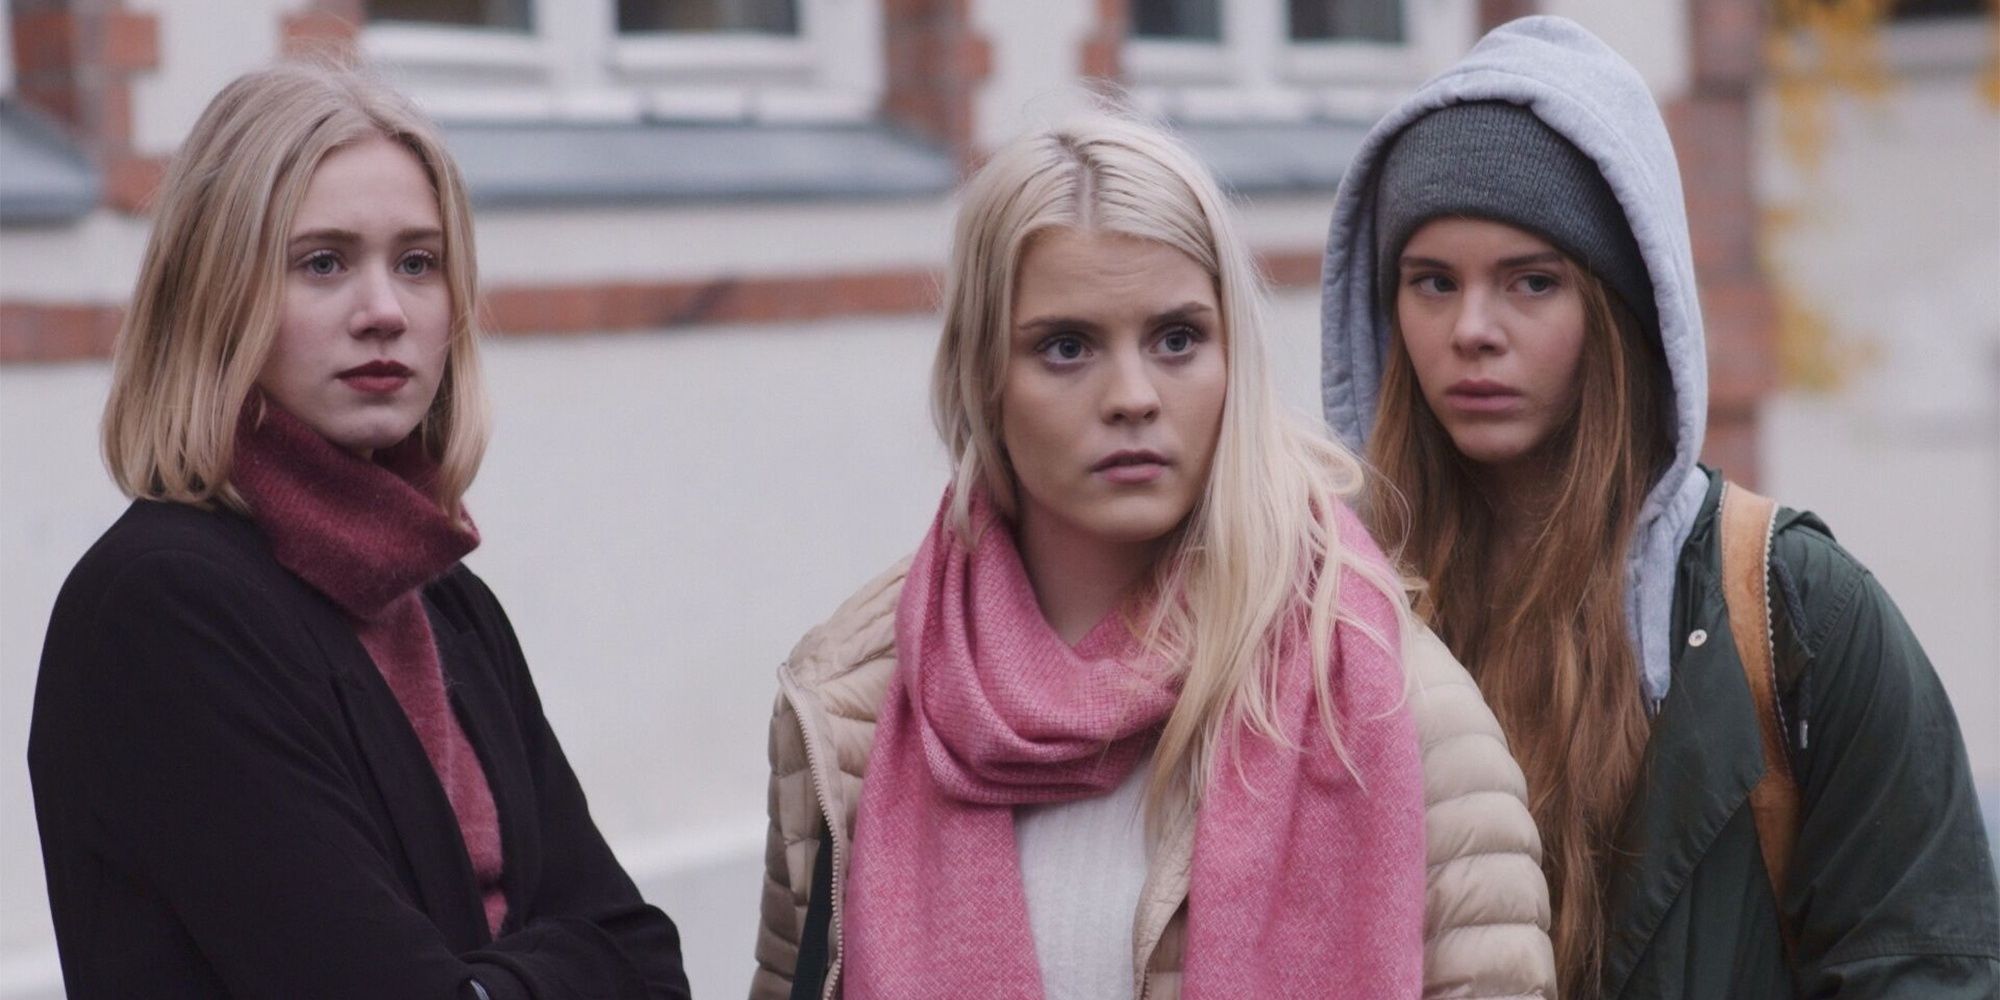 The characters from the Norwegian series Skam.